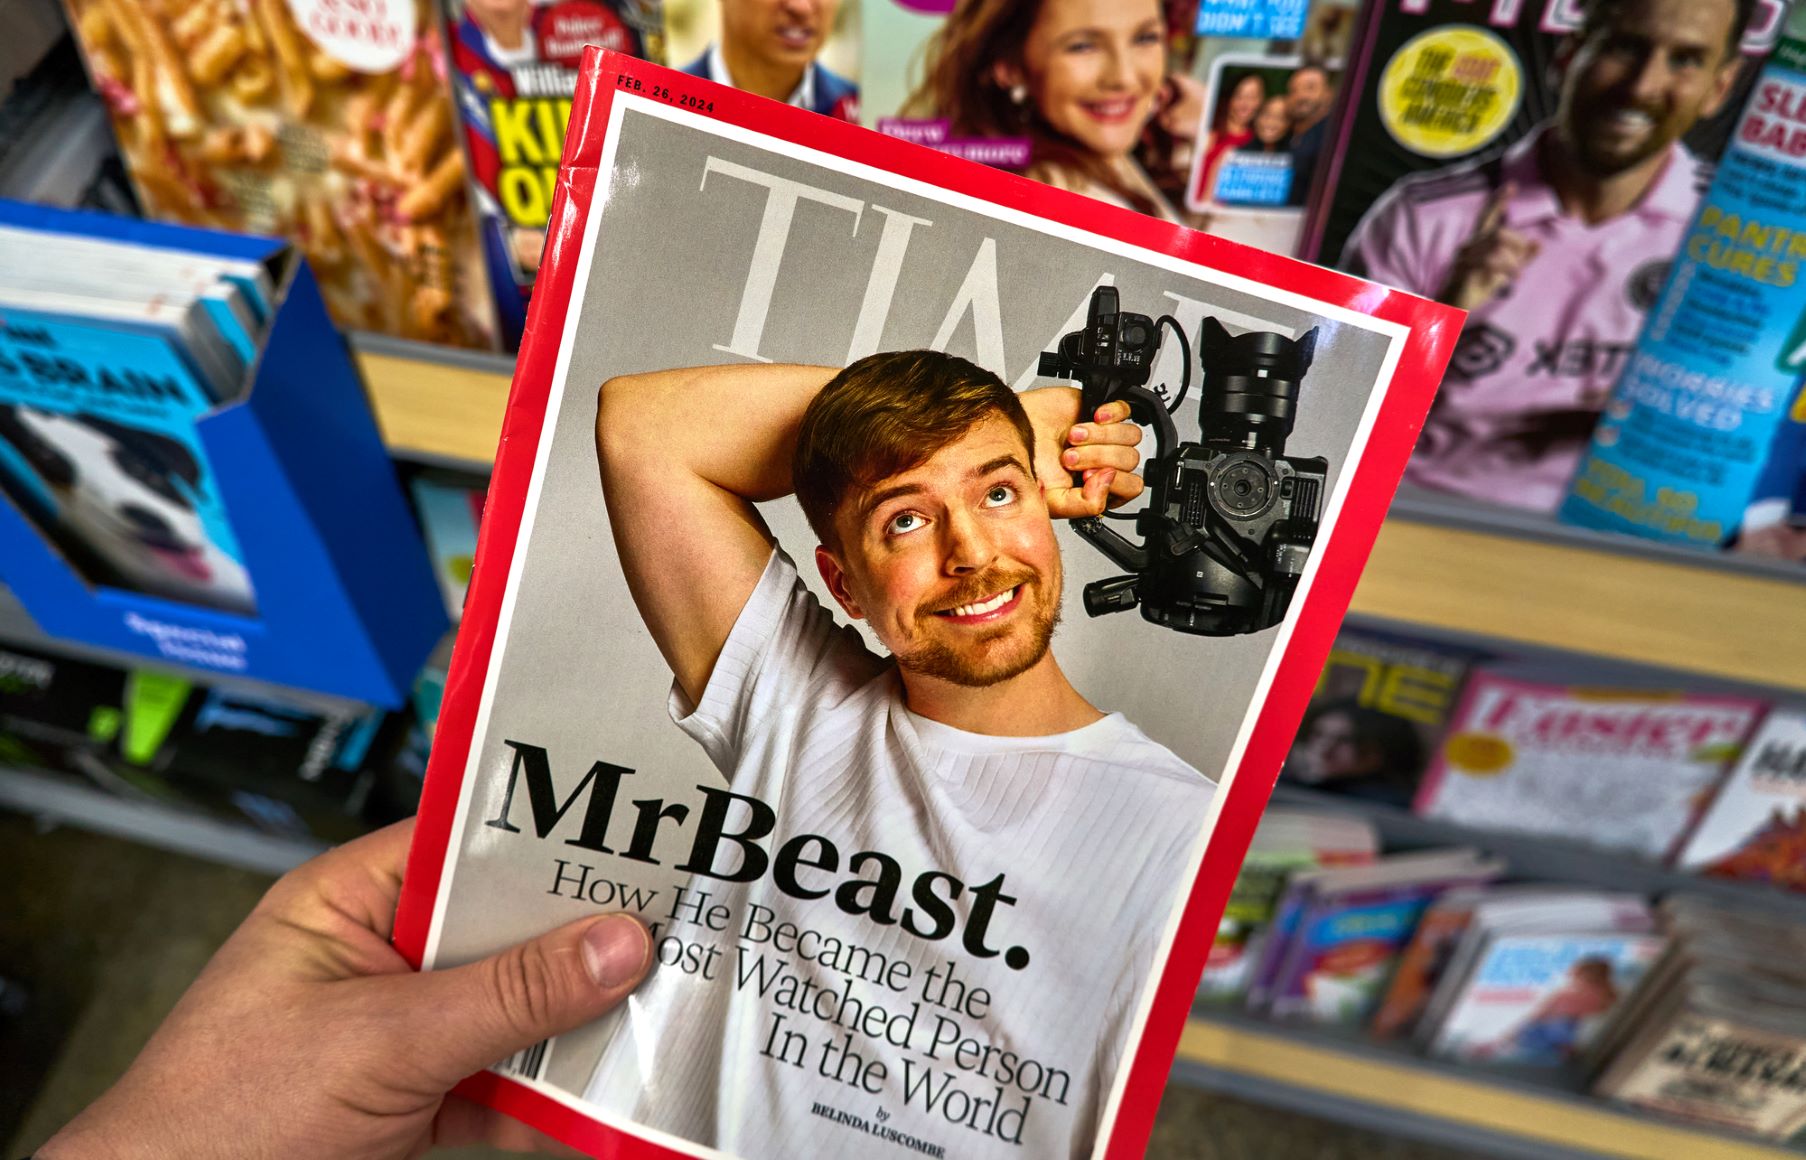 ‘most-subscribed-youtube-channel’-heats-up:-mrbeast-vs.-t-series